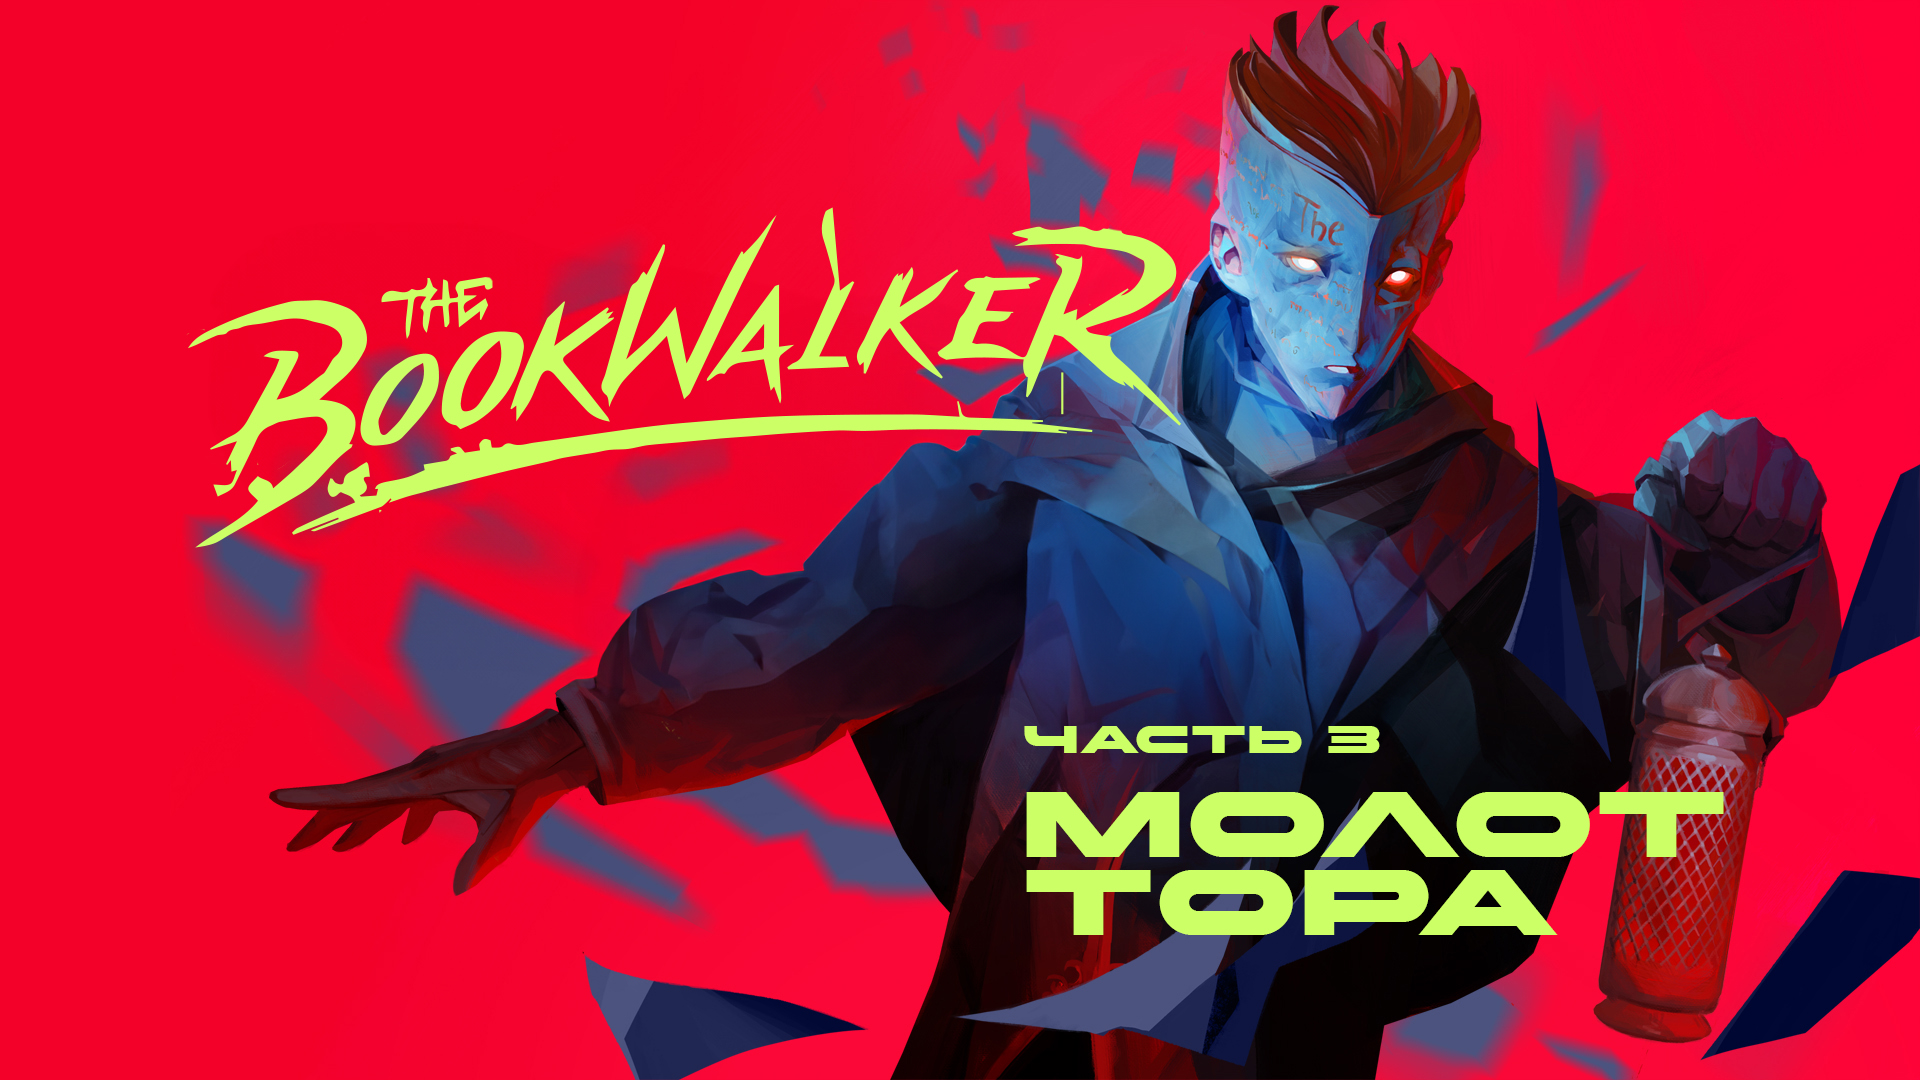 The Bookwalker: Thief of Tales #3 | МОЛОТ ТОРА